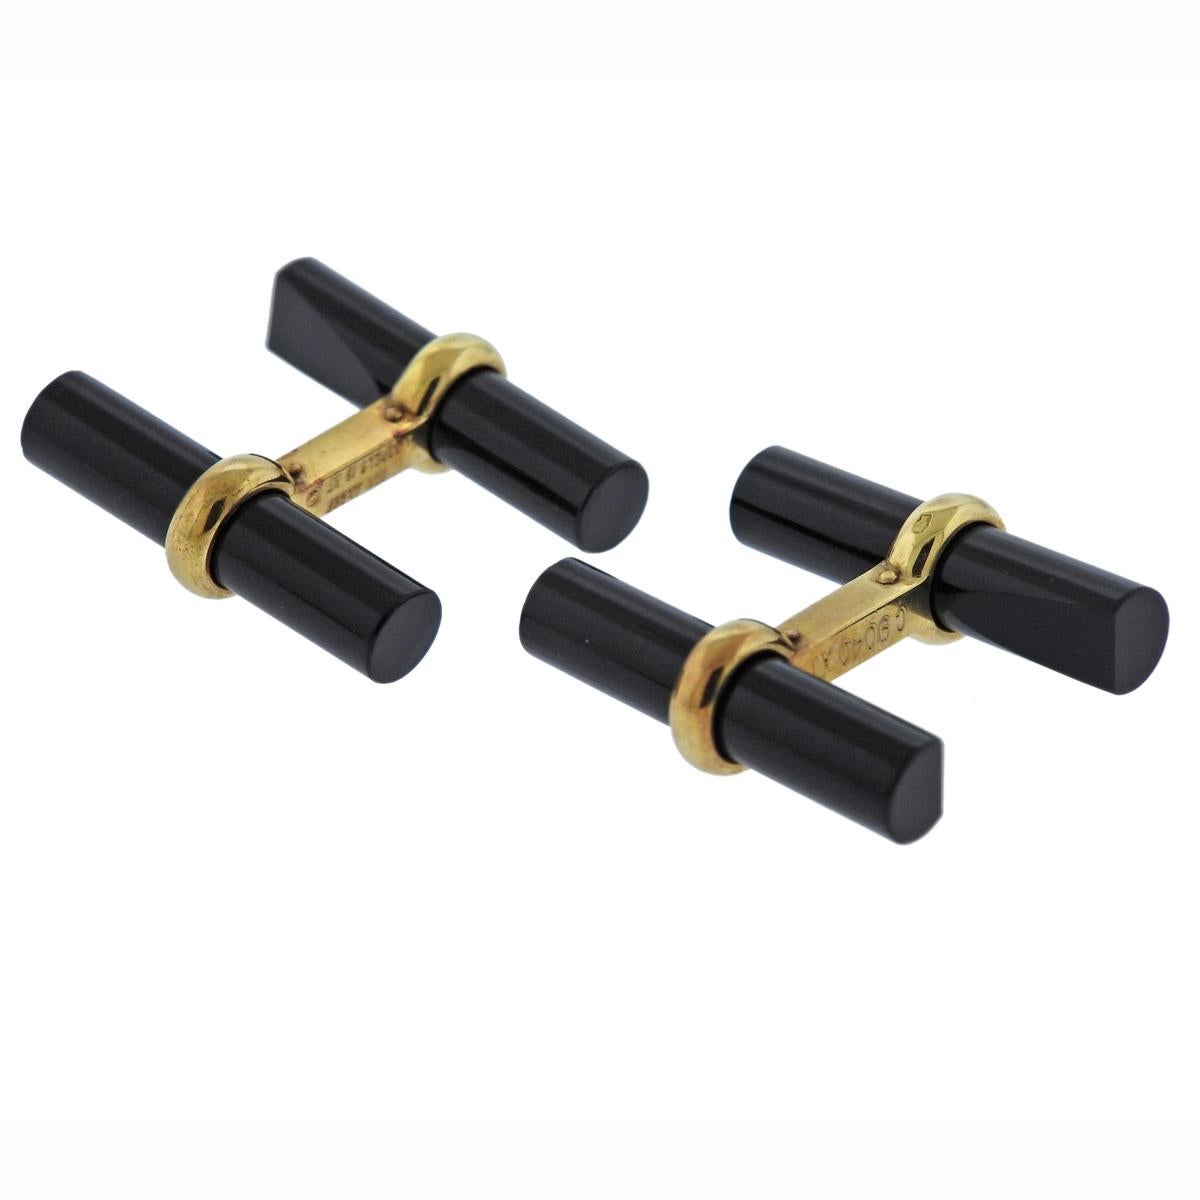 Pair of 18k yellow gold cufflinks, crafted by Van Cleef & Arpels, set with black onyx. Cufflink top measures 22mm x 6mm and weigh 8.6 grams. Marked Van Cleef & Arpels, C9040XI, 18KT.